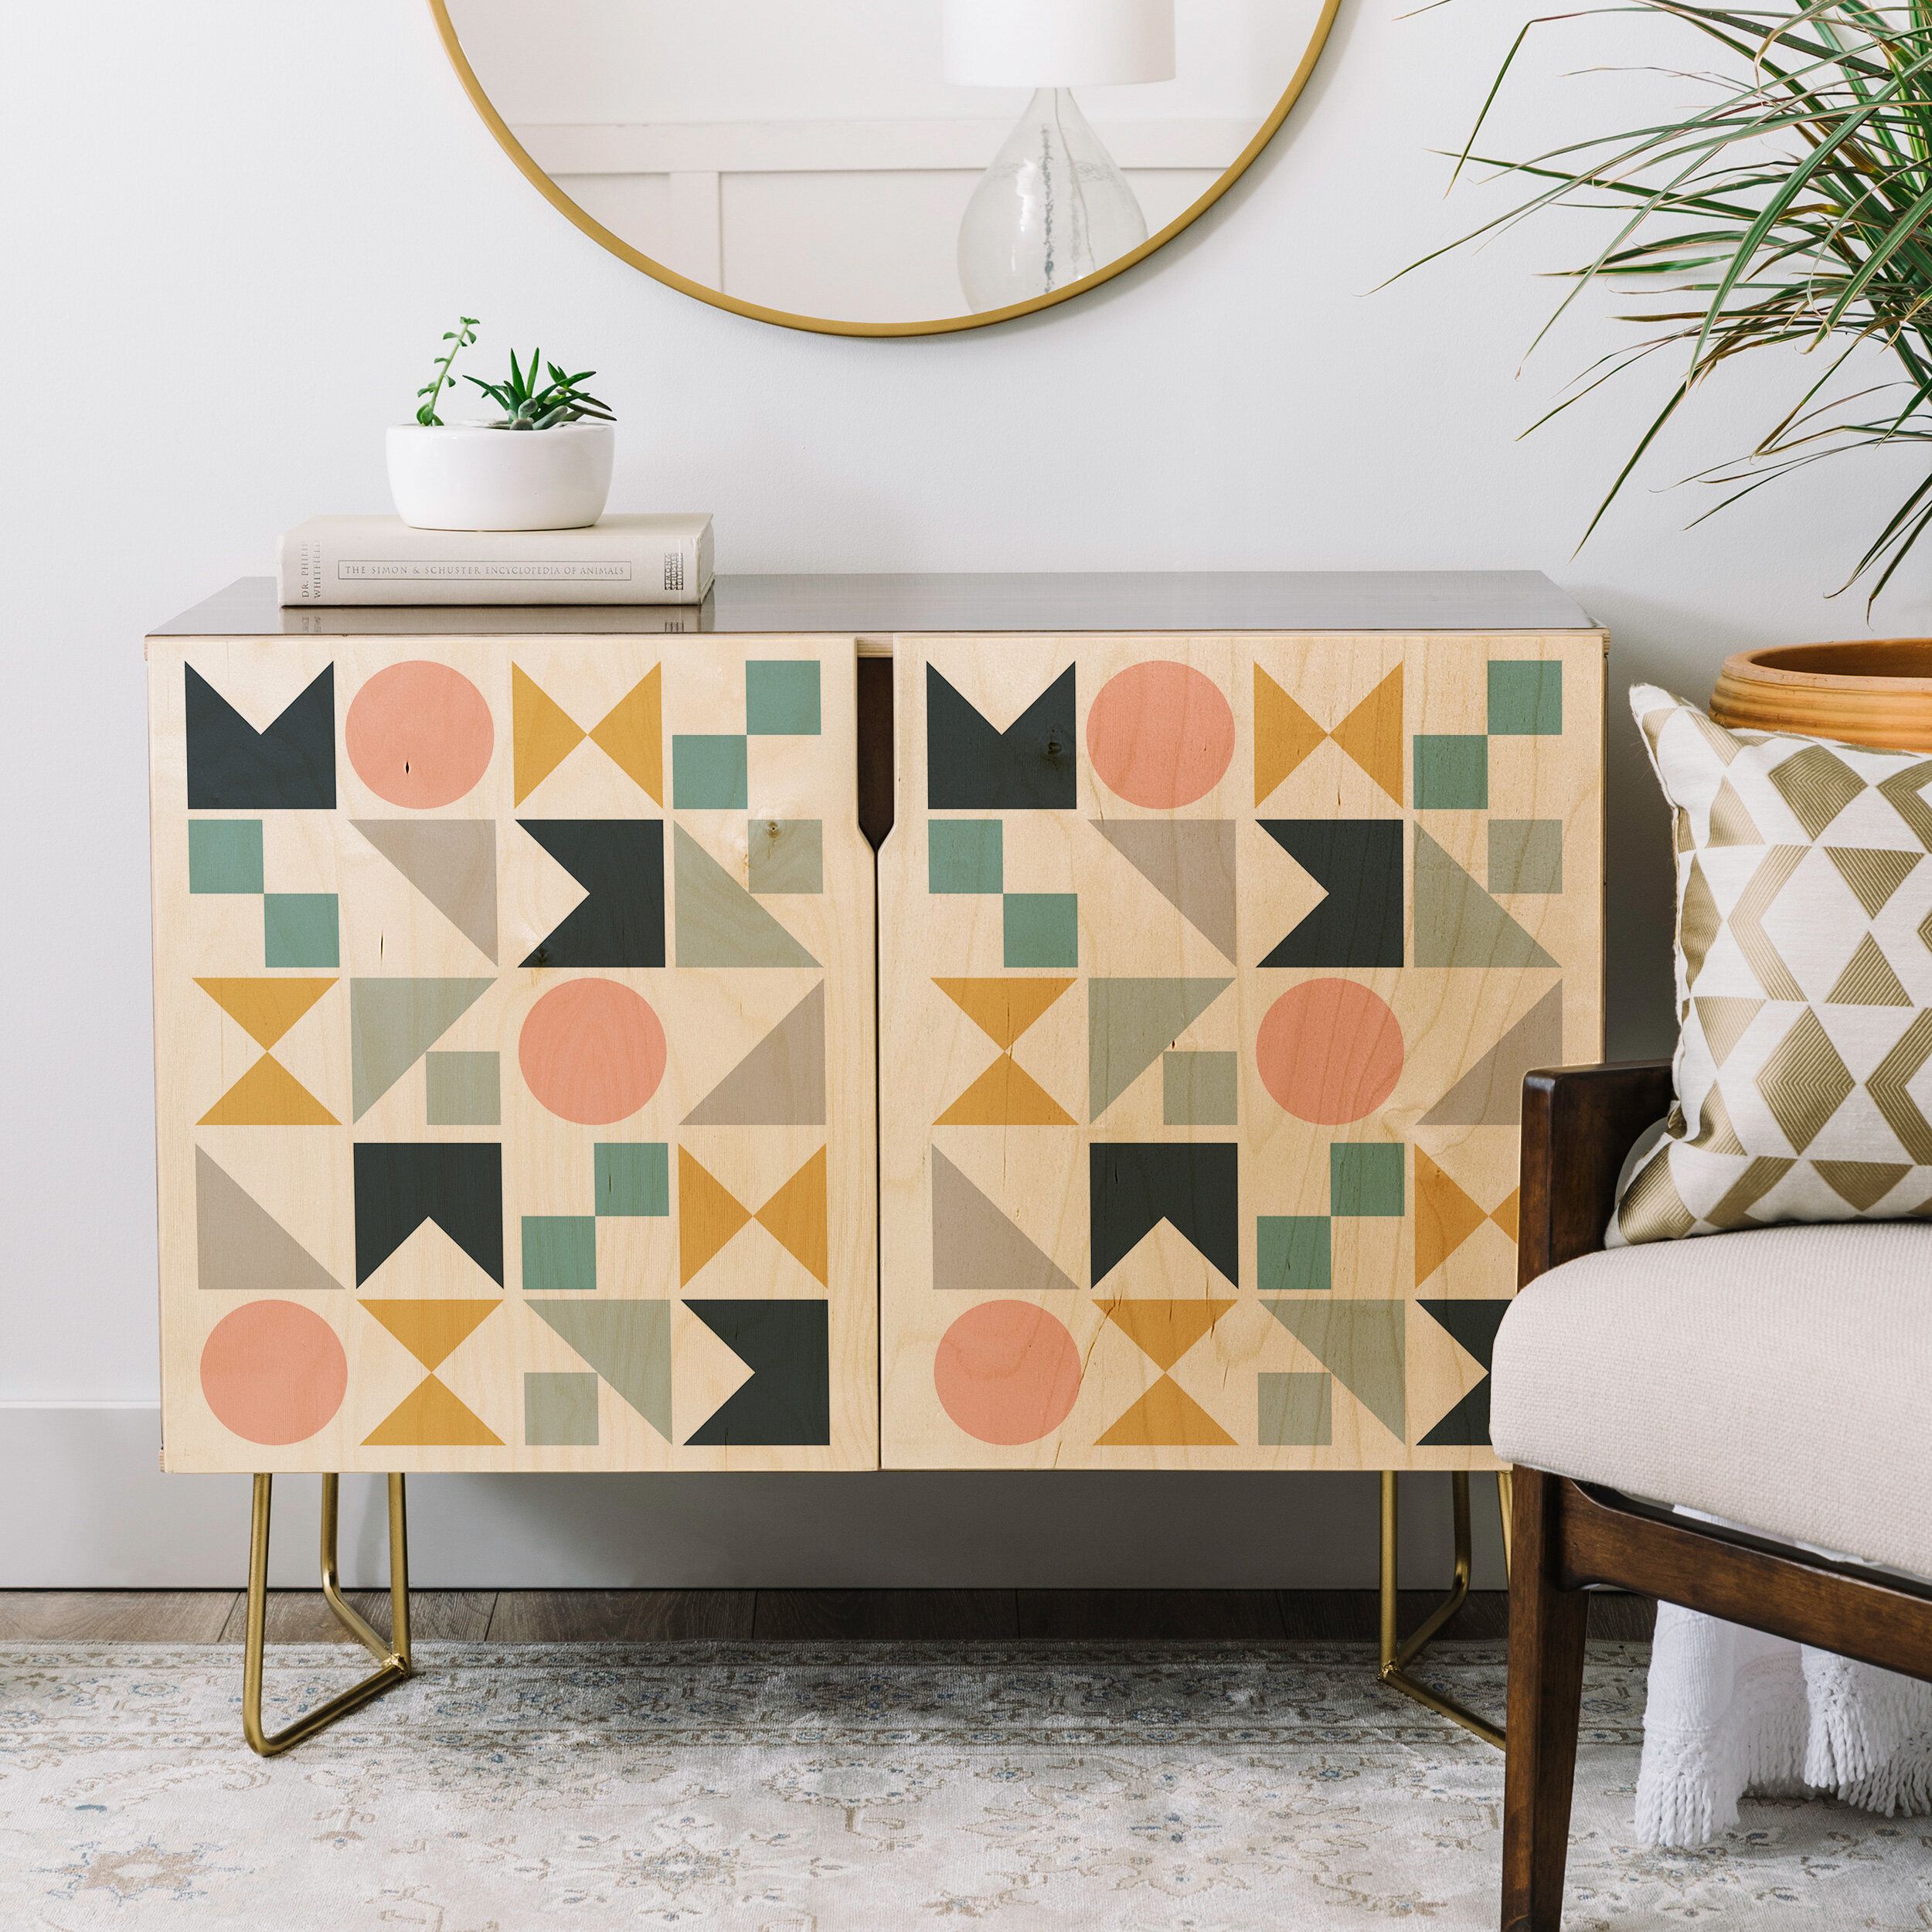 The Old Art Studio Modern Geometric Credenza Pertaining To Multi Colored Geometric Shapes Credenzas (View 17 of 30)